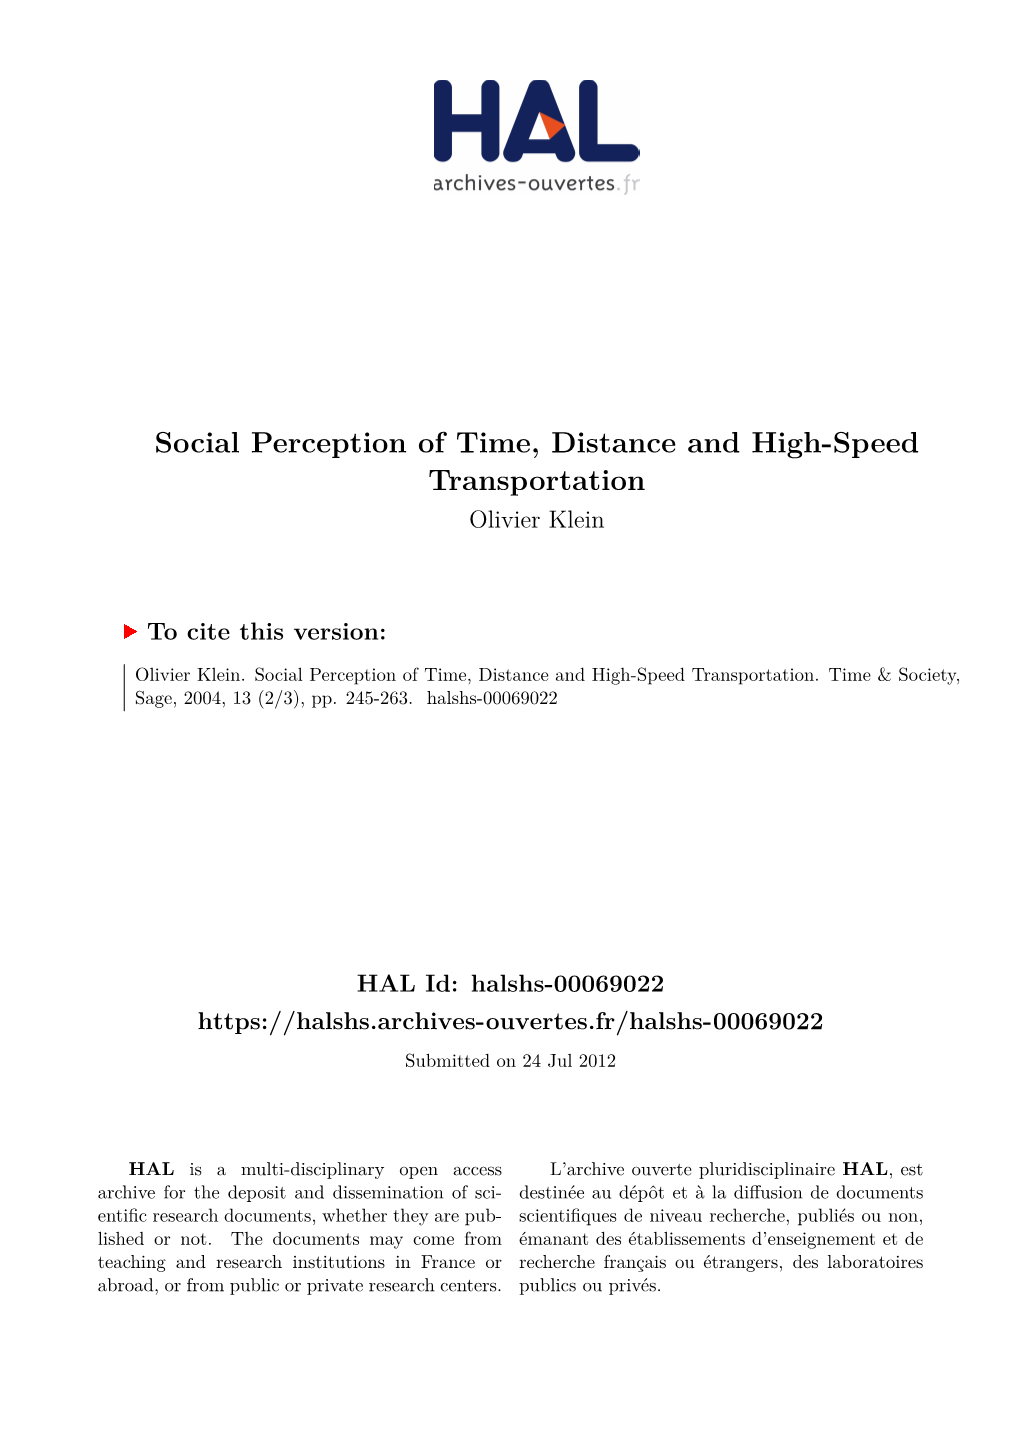 Social Perception of Time, Distance and High-Speed Transportation Olivier Klein